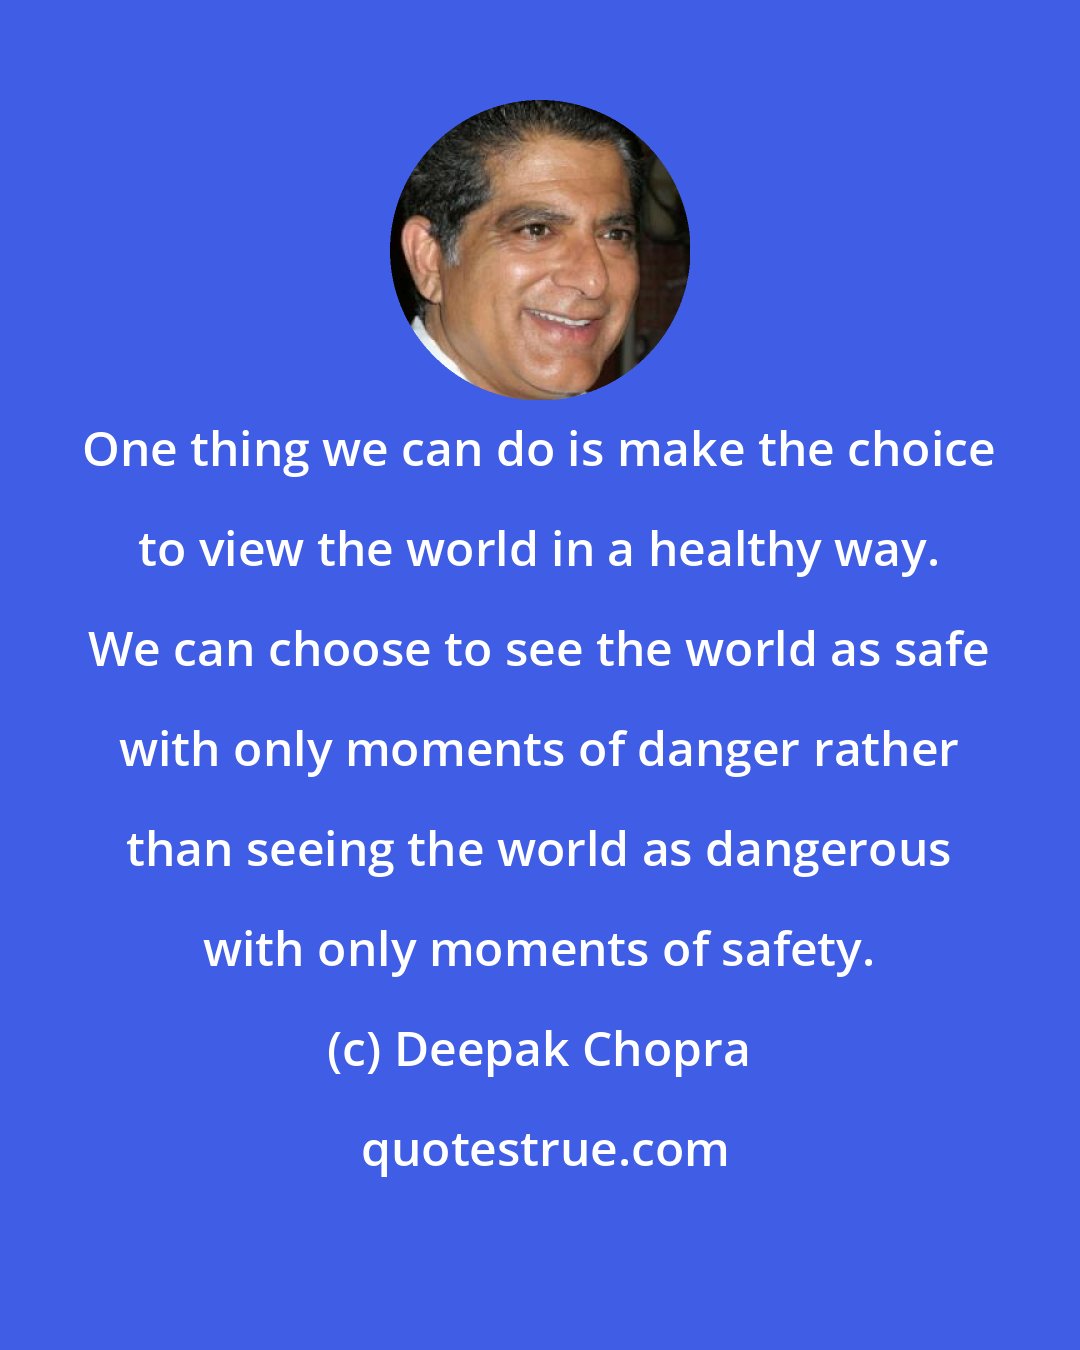 Deepak Chopra: One thing we can do is make the choice to view the world in a healthy way. We can choose to see the world as safe with only moments of danger rather than seeing the world as dangerous with only moments of safety.